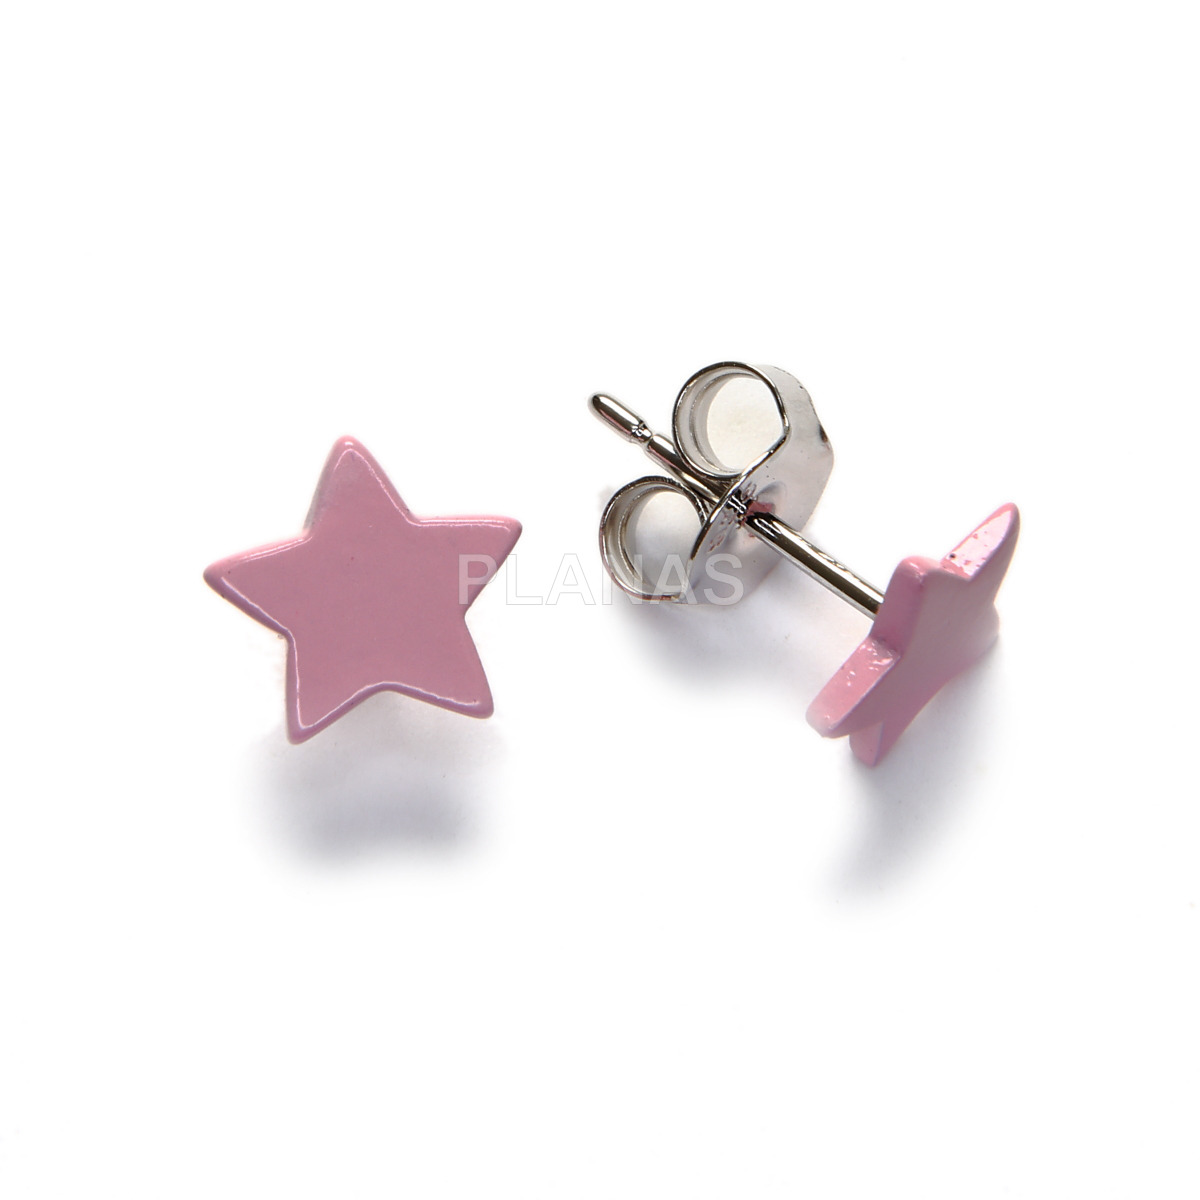 Rhodium-plated sterling silver and enamel earrings. star.